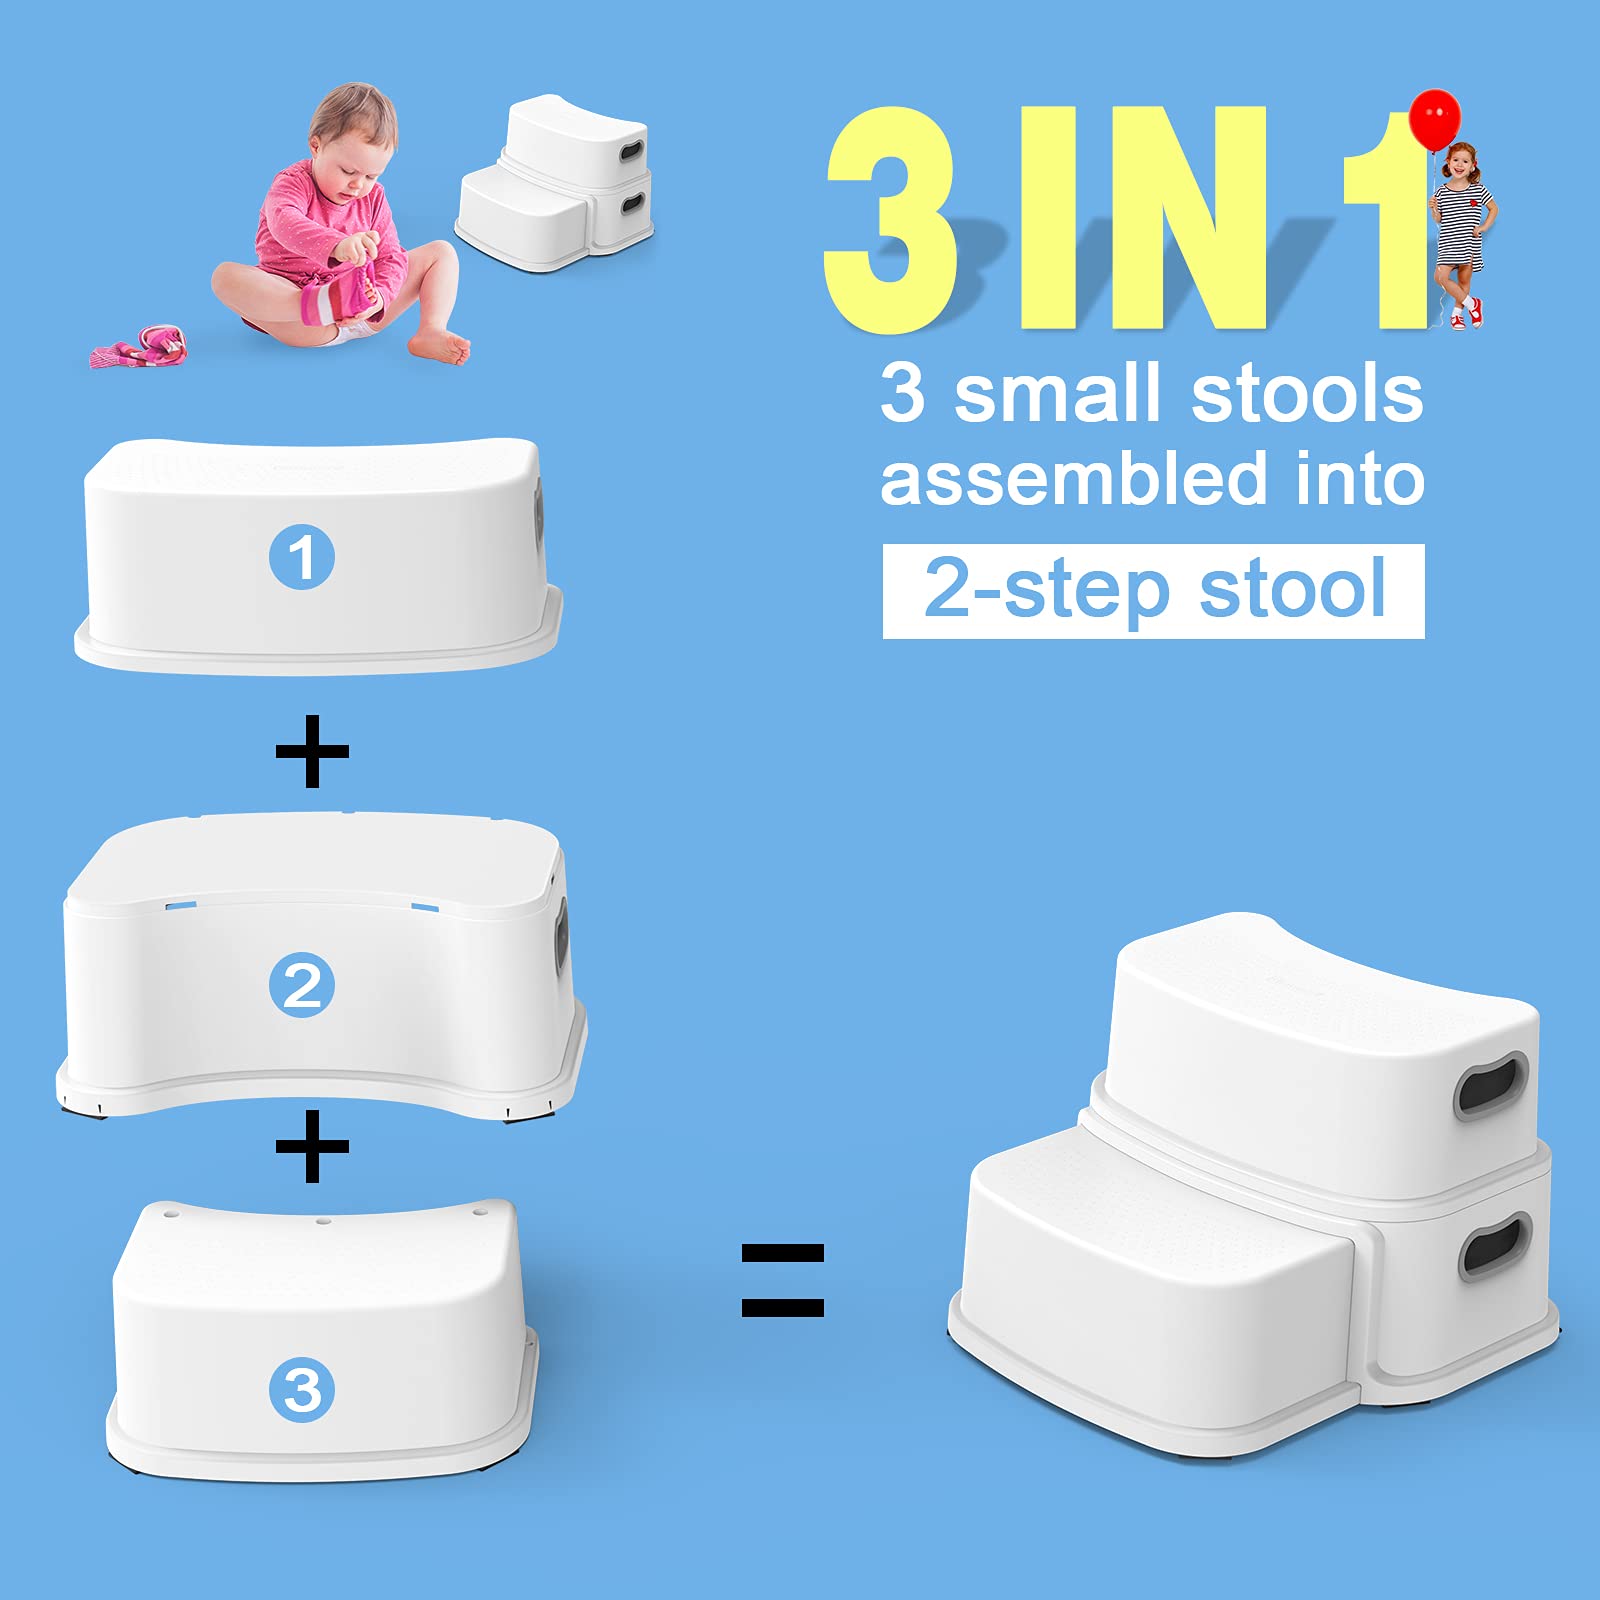 Glamore 2 Step Stool for Kids, Toddler Step Stool, Kids Step Stool for Potty Training, Bathroom Toilet Stool, Slip Resistant, Dual Height 4.5"- 9.4", Dual Width 5"- 6", White 2 Pack